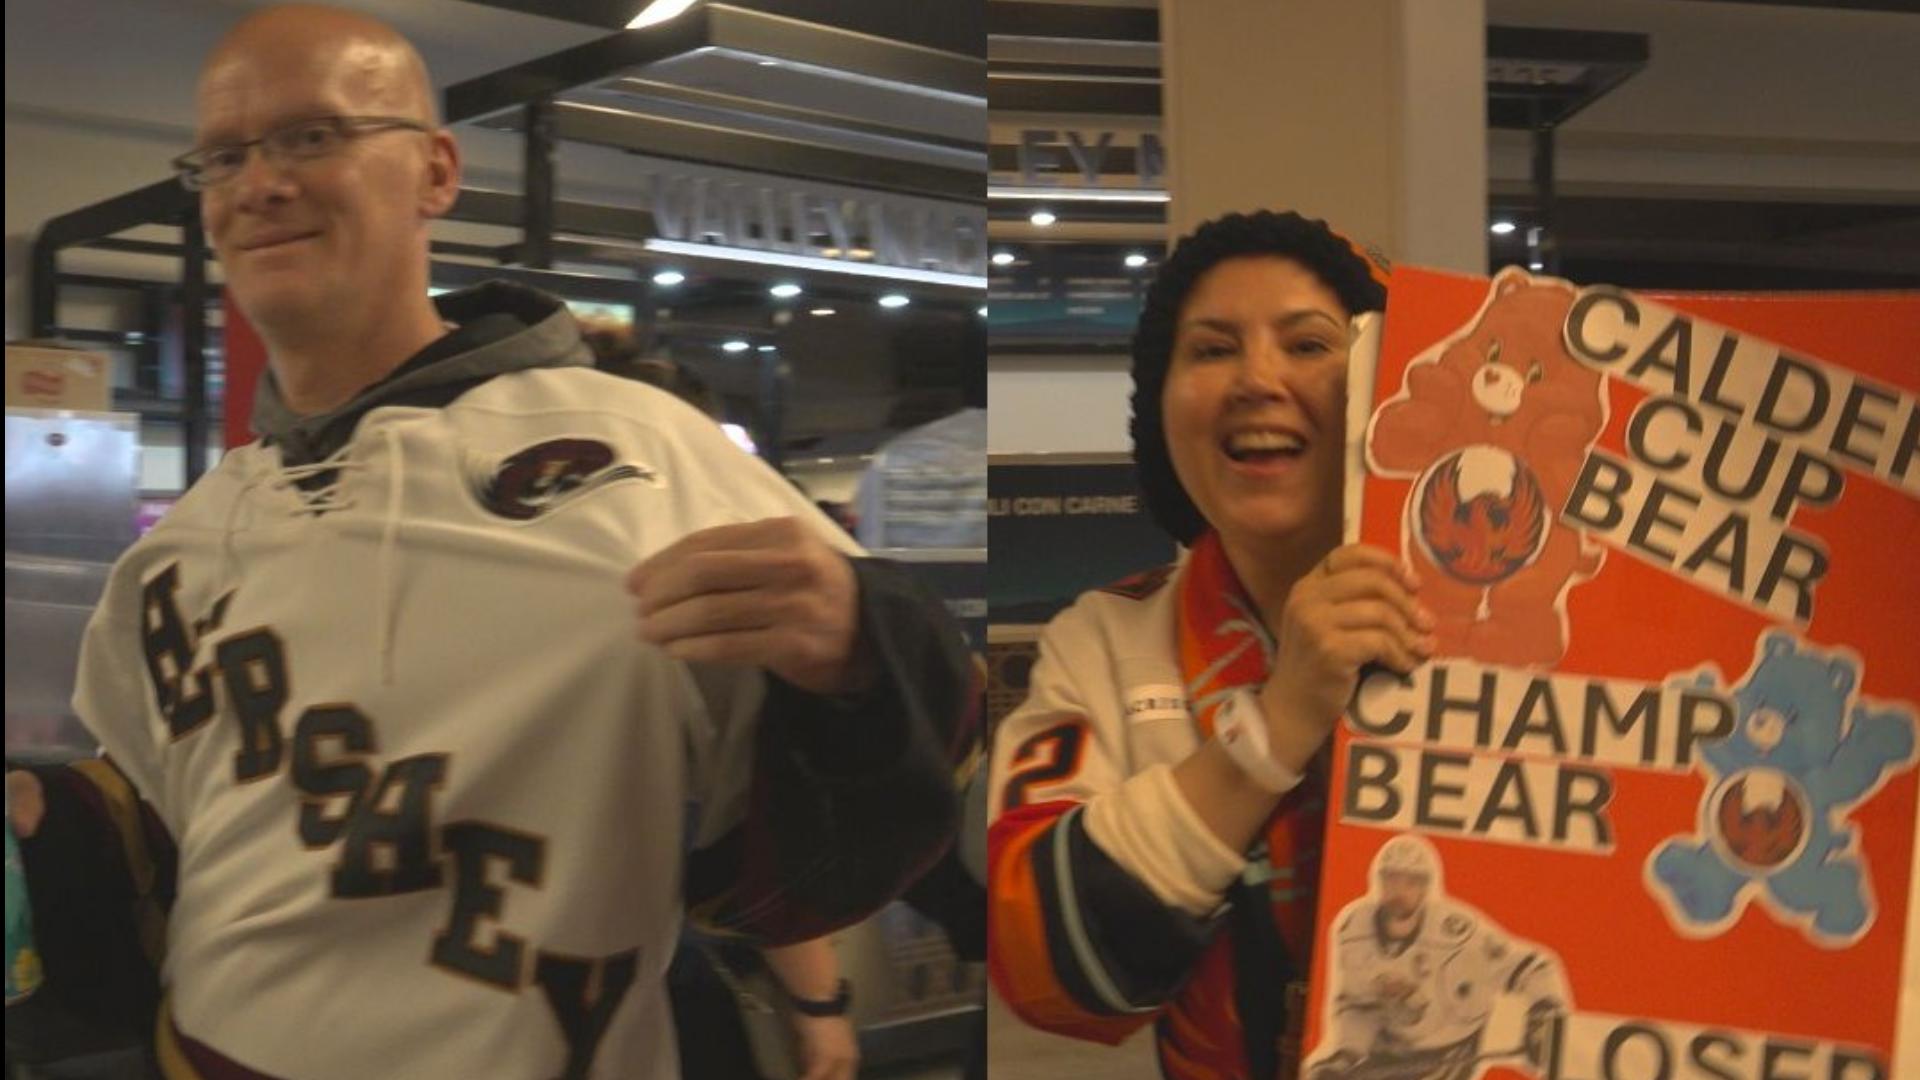 While Bears fans aim to repeat the roar, Firebirds fans are hoping for redemption in the highly anticipated Calder Cup rematch between the two clubs.